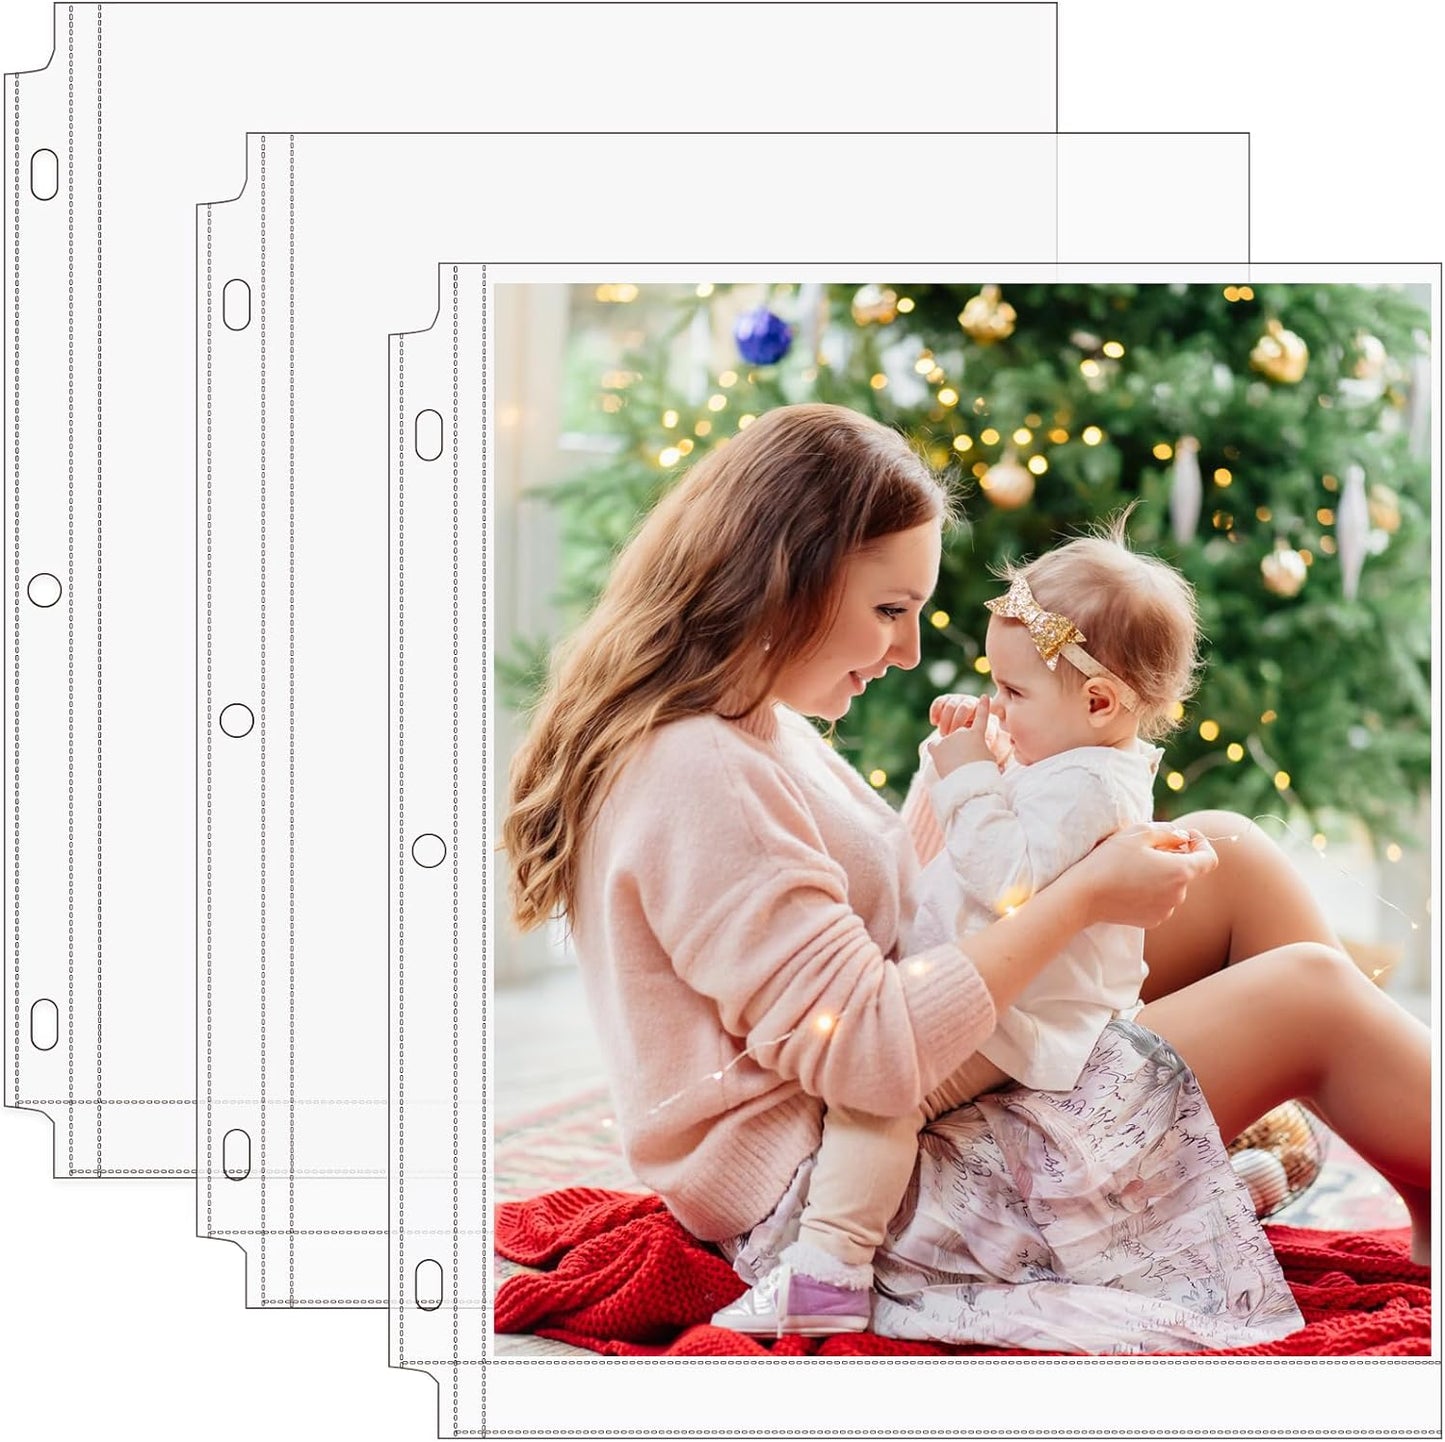 30 Pack Photo Sleeves for 3 Ring Binder 4X6, for 180 Photos Archival Photo Pages Photo Album Refill Pages Photo Sheet Protector Page Protectors 8.5 X 11